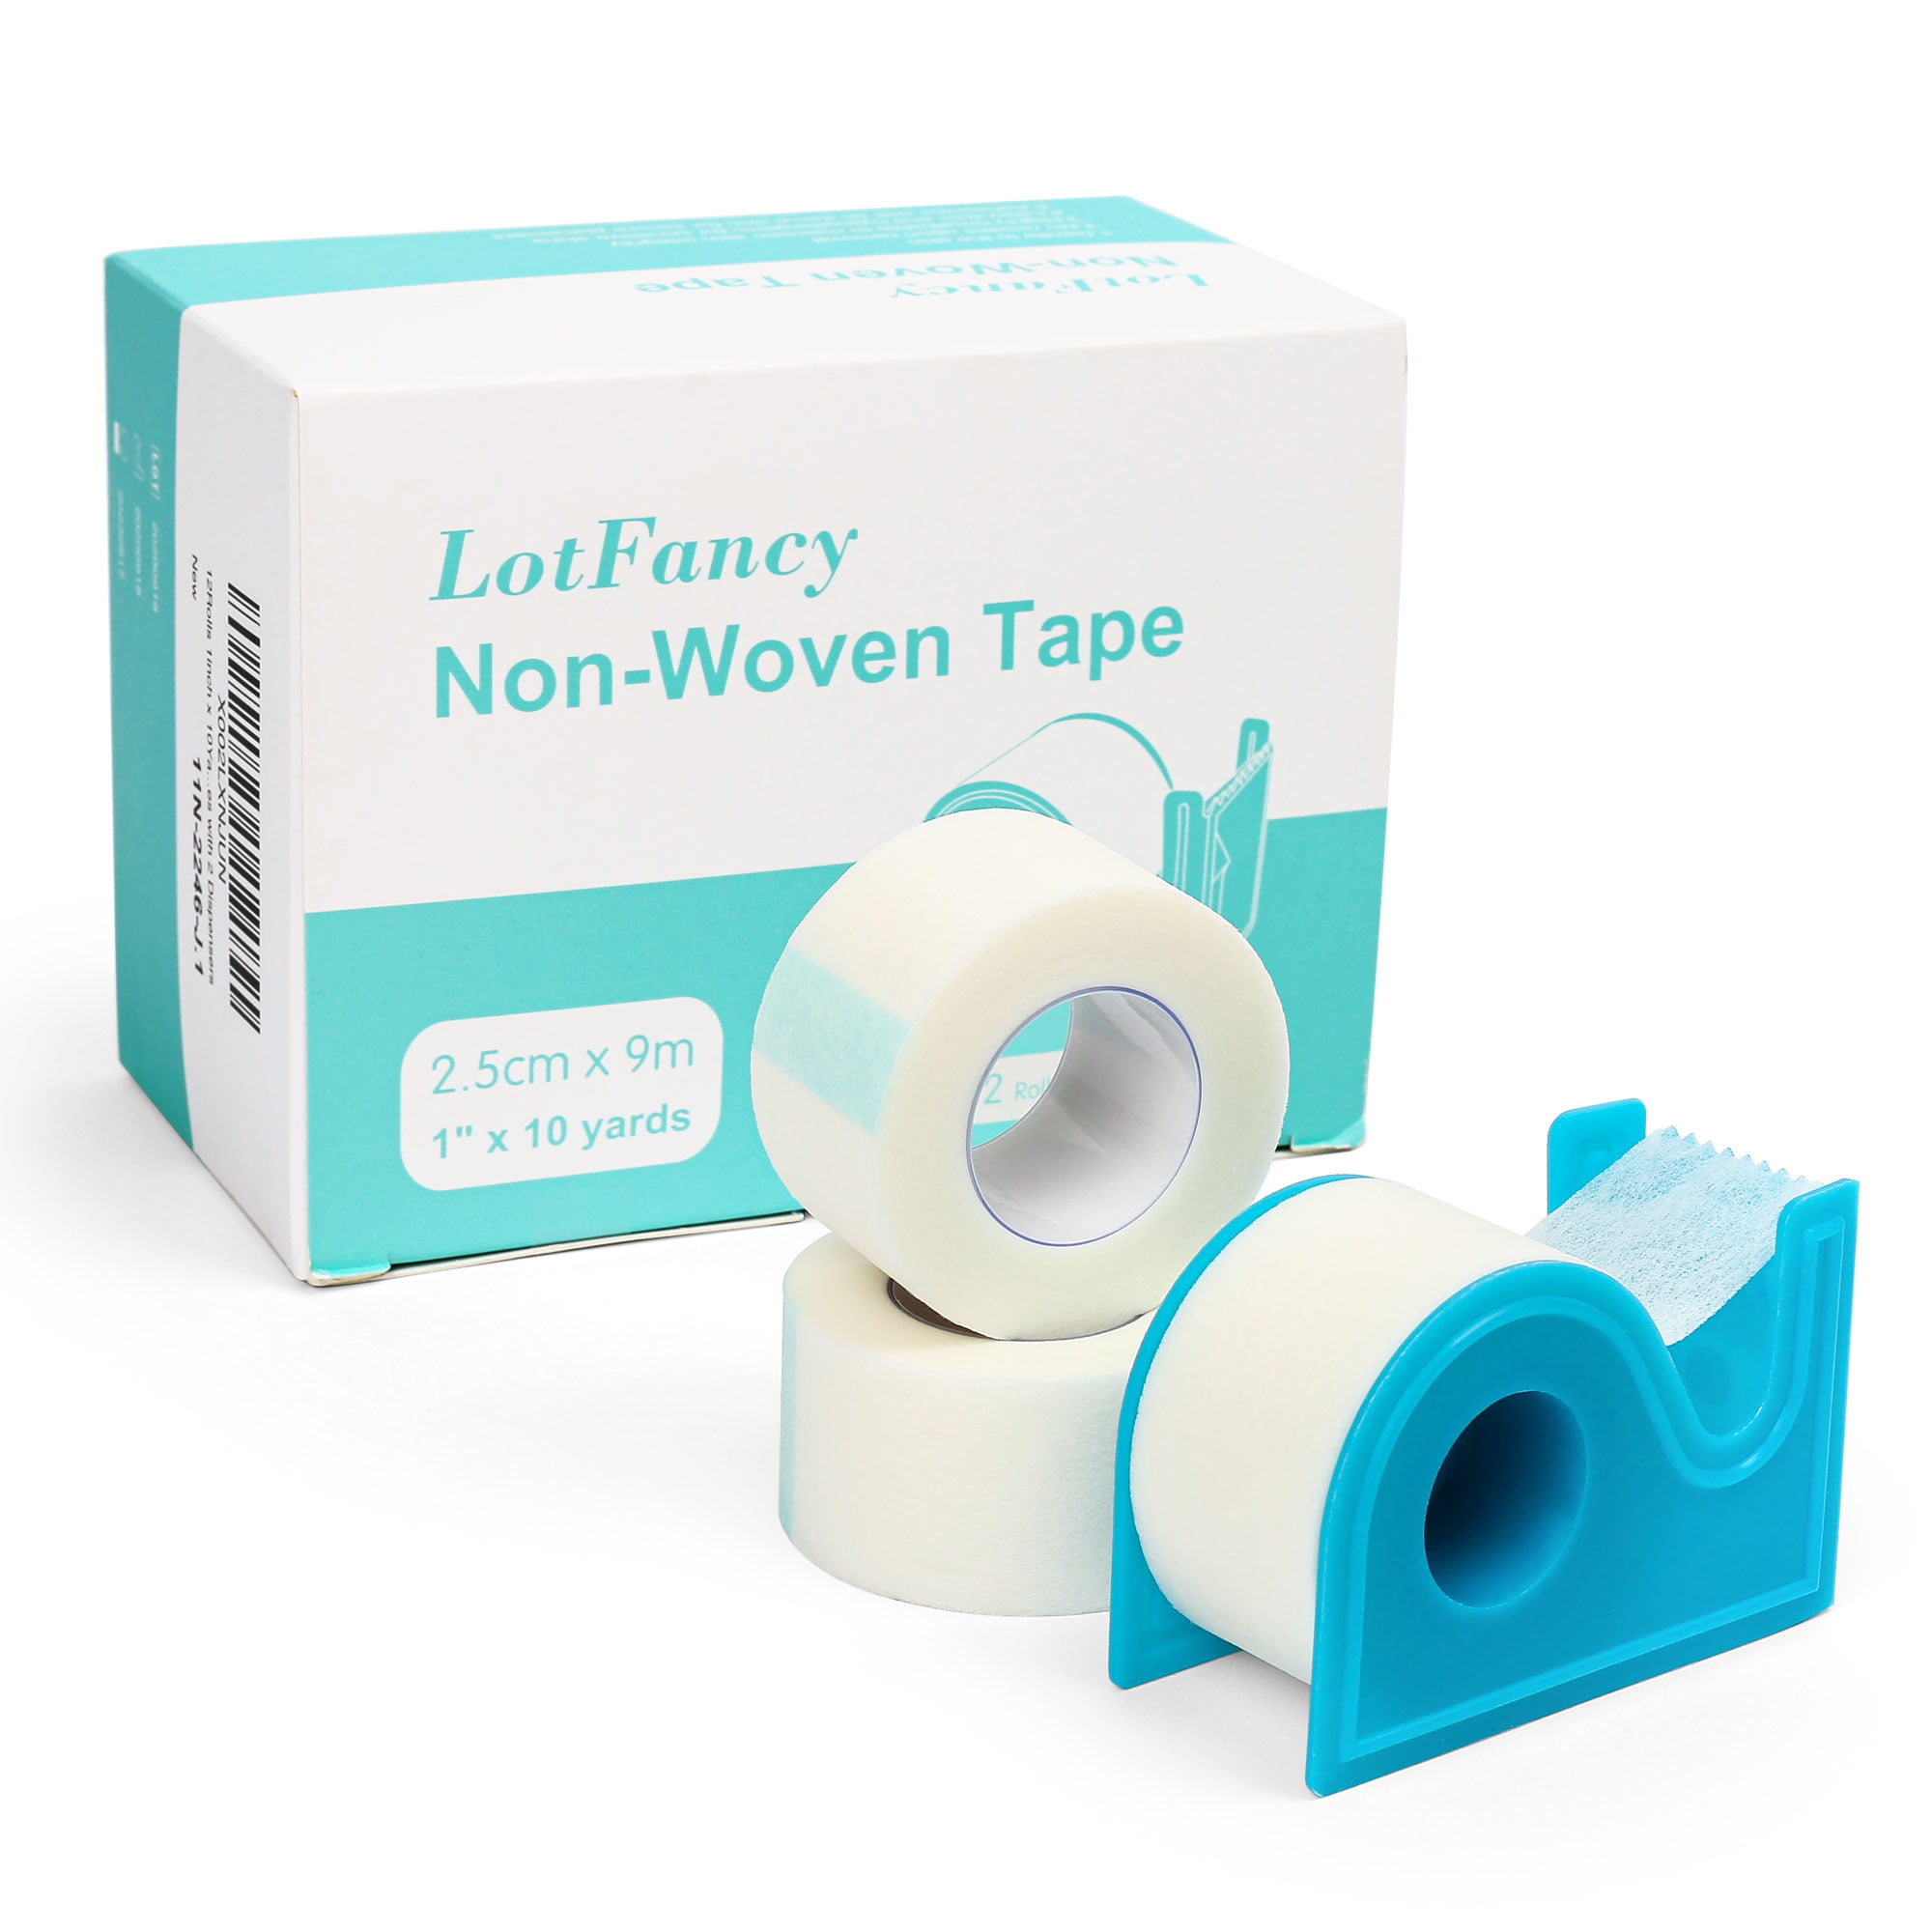 Sack Patch Tape - 6 Wide x 25 LY. Roll White - BagCorp